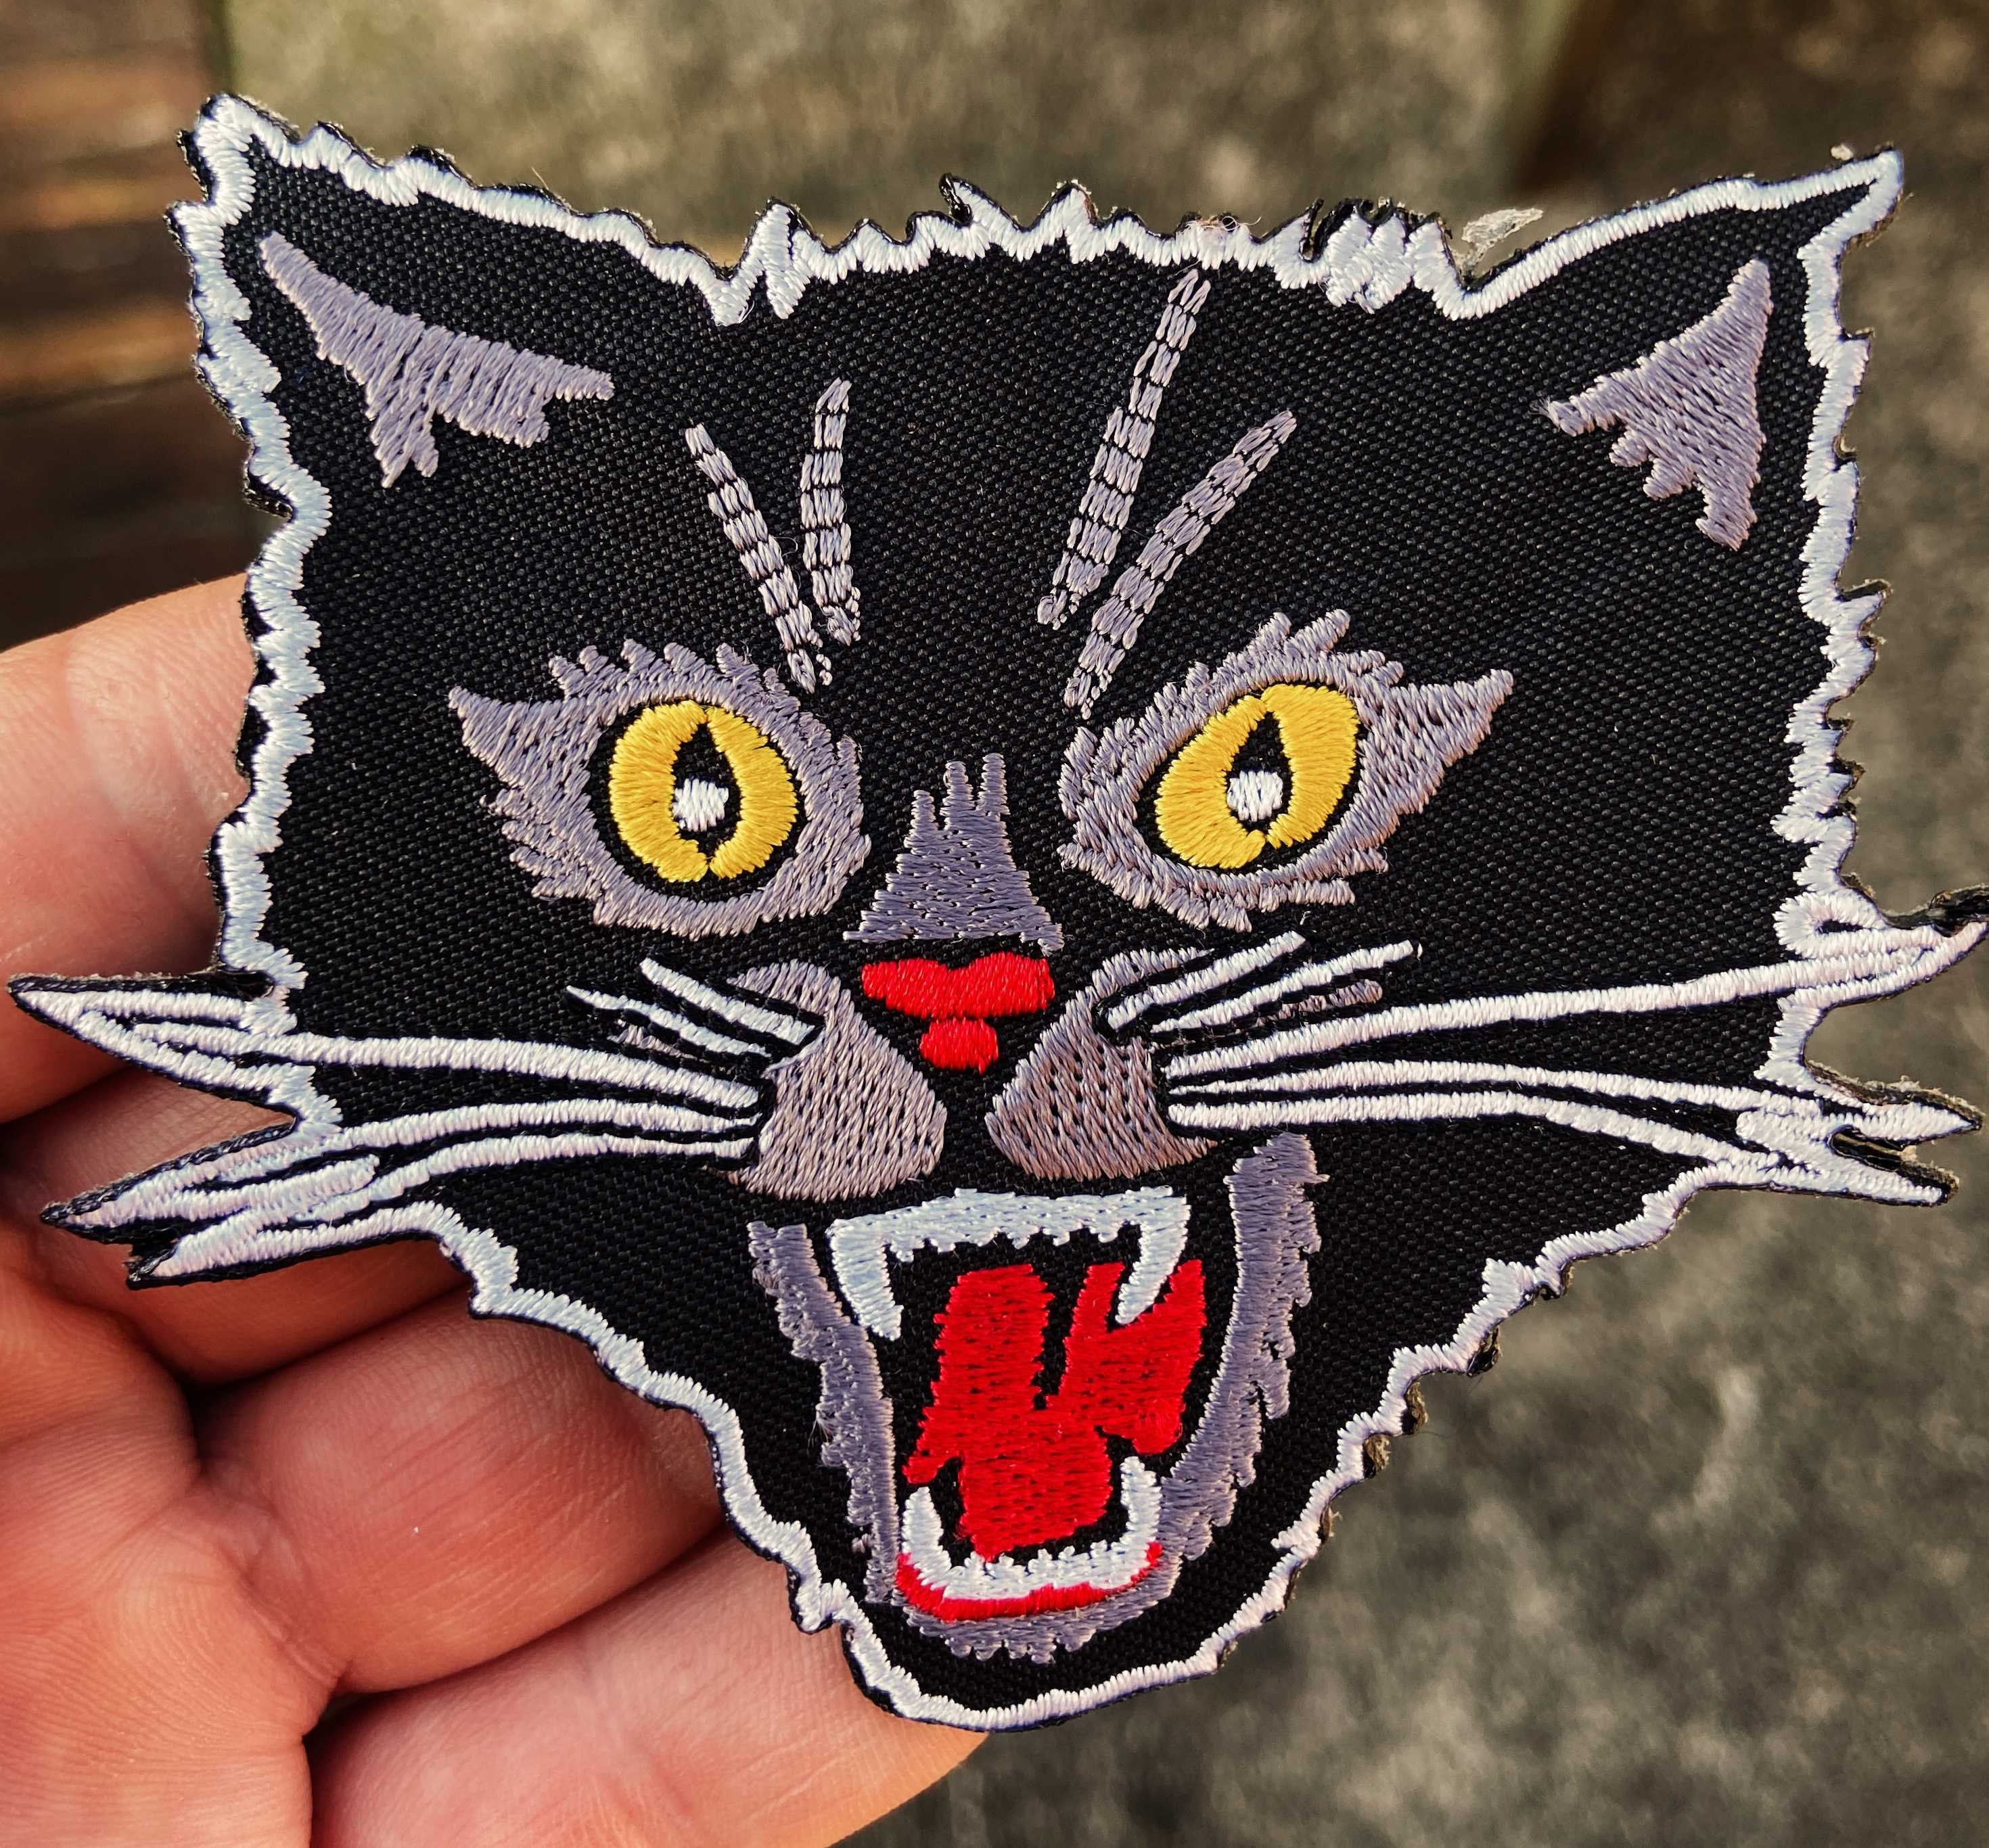 BLACK CAT Anarchy-punk Patches-patches for Jackets-patch-punk  Clothing-lgbtq Patches-punk Accessories-antifa Patches-feminist Patch 